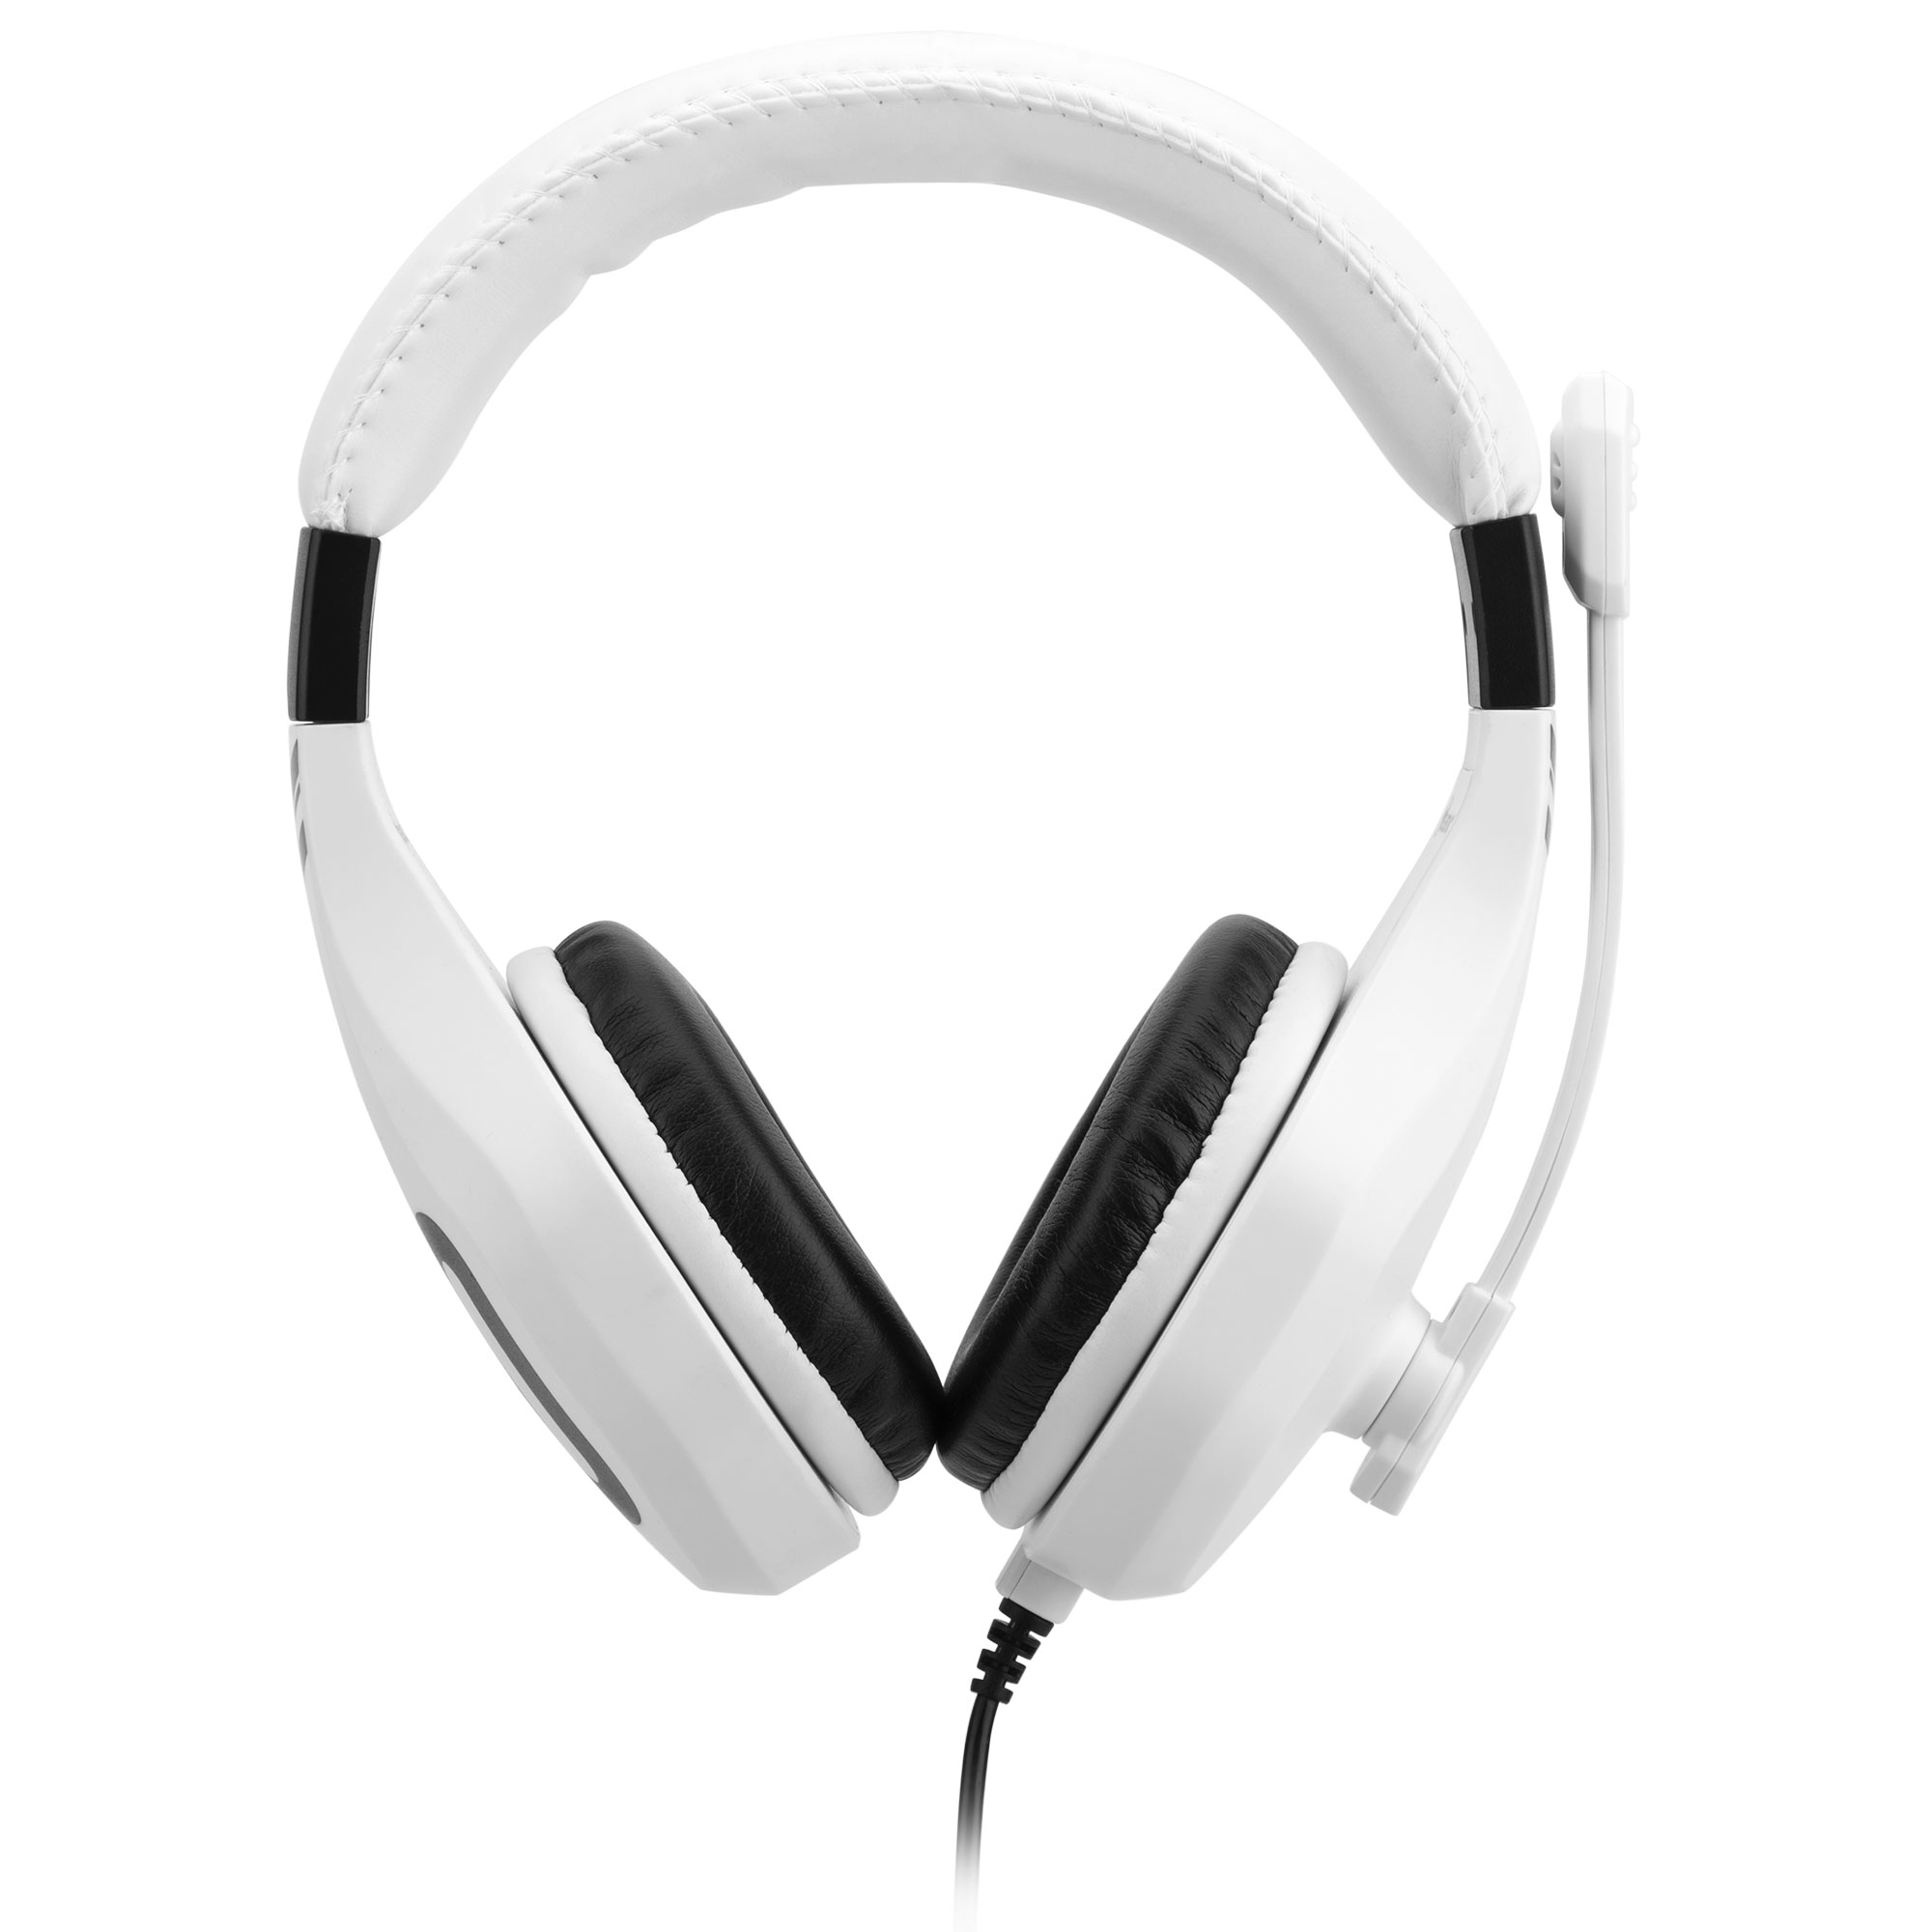 SUBSONIC - Casque gaming blanc avec micro compatible ps5 xbox seire x/s ps4  xbox one et pc